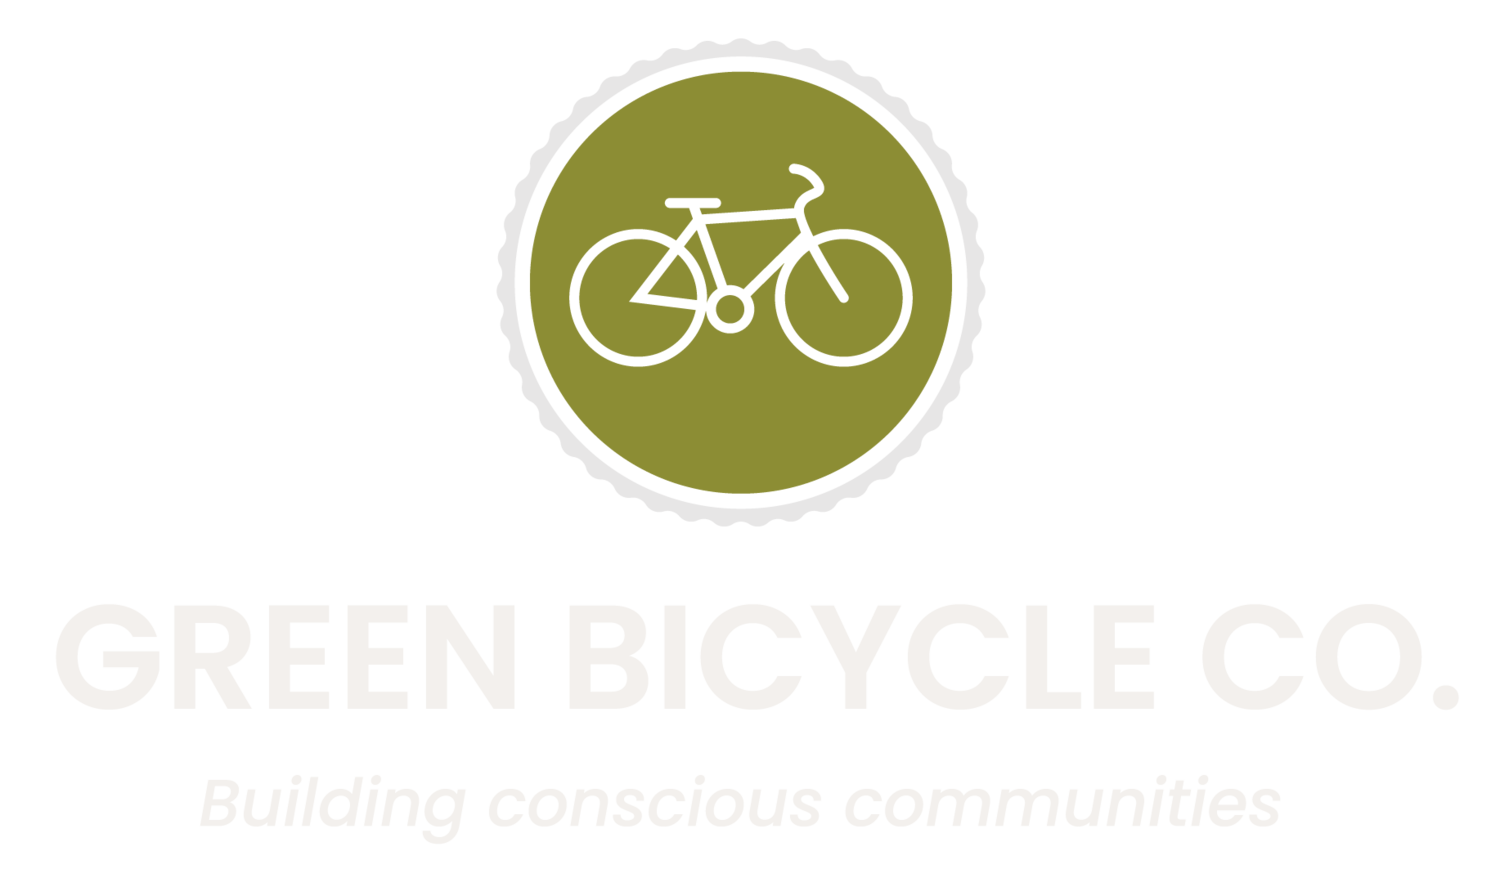 Green Bicycle Co.